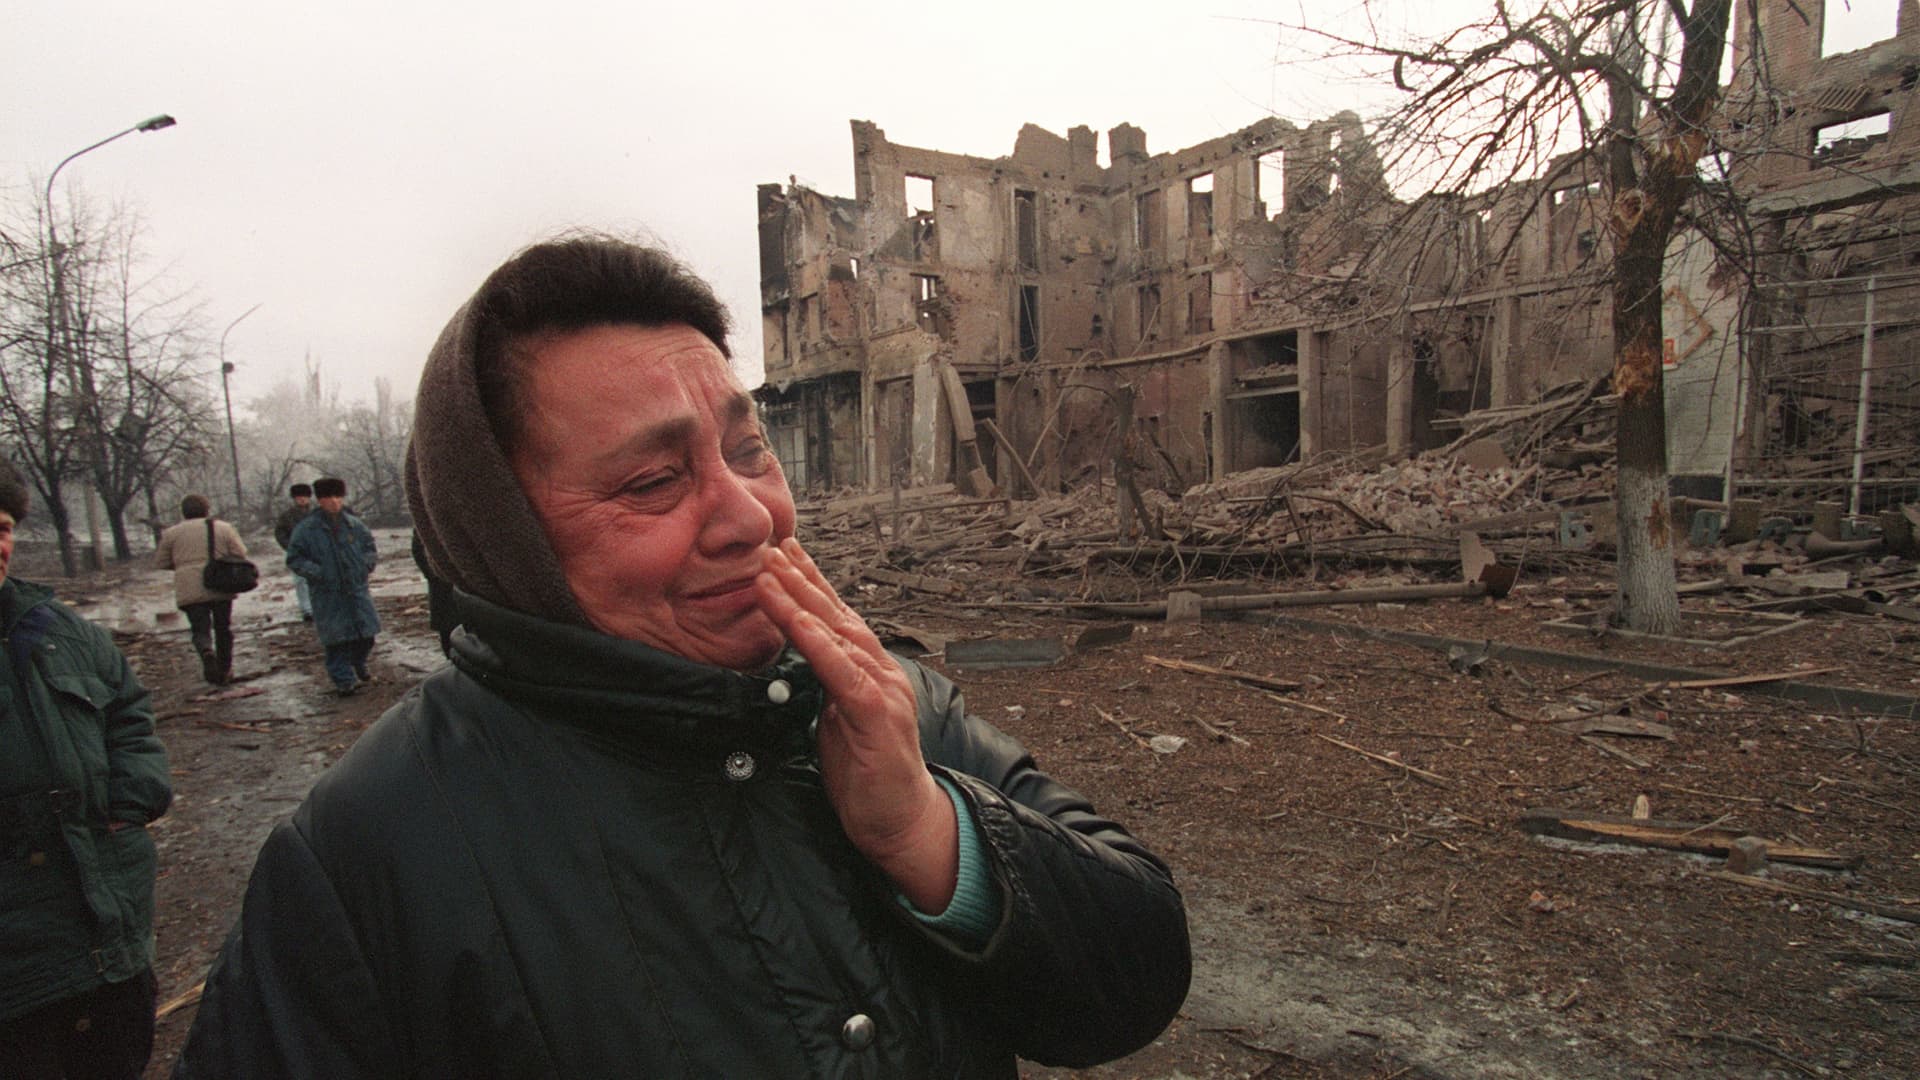 A Chechen woman cries as she walks past one of the main streets in Grozny 28 December 1994, capital of the breakaway southern republic of Chechnya, destroyed by heavy Russian bombings. Russian troops entered Chechnya 11 December 1994 with the stated aim of introducing constitutional rule in the Caucasus republic.